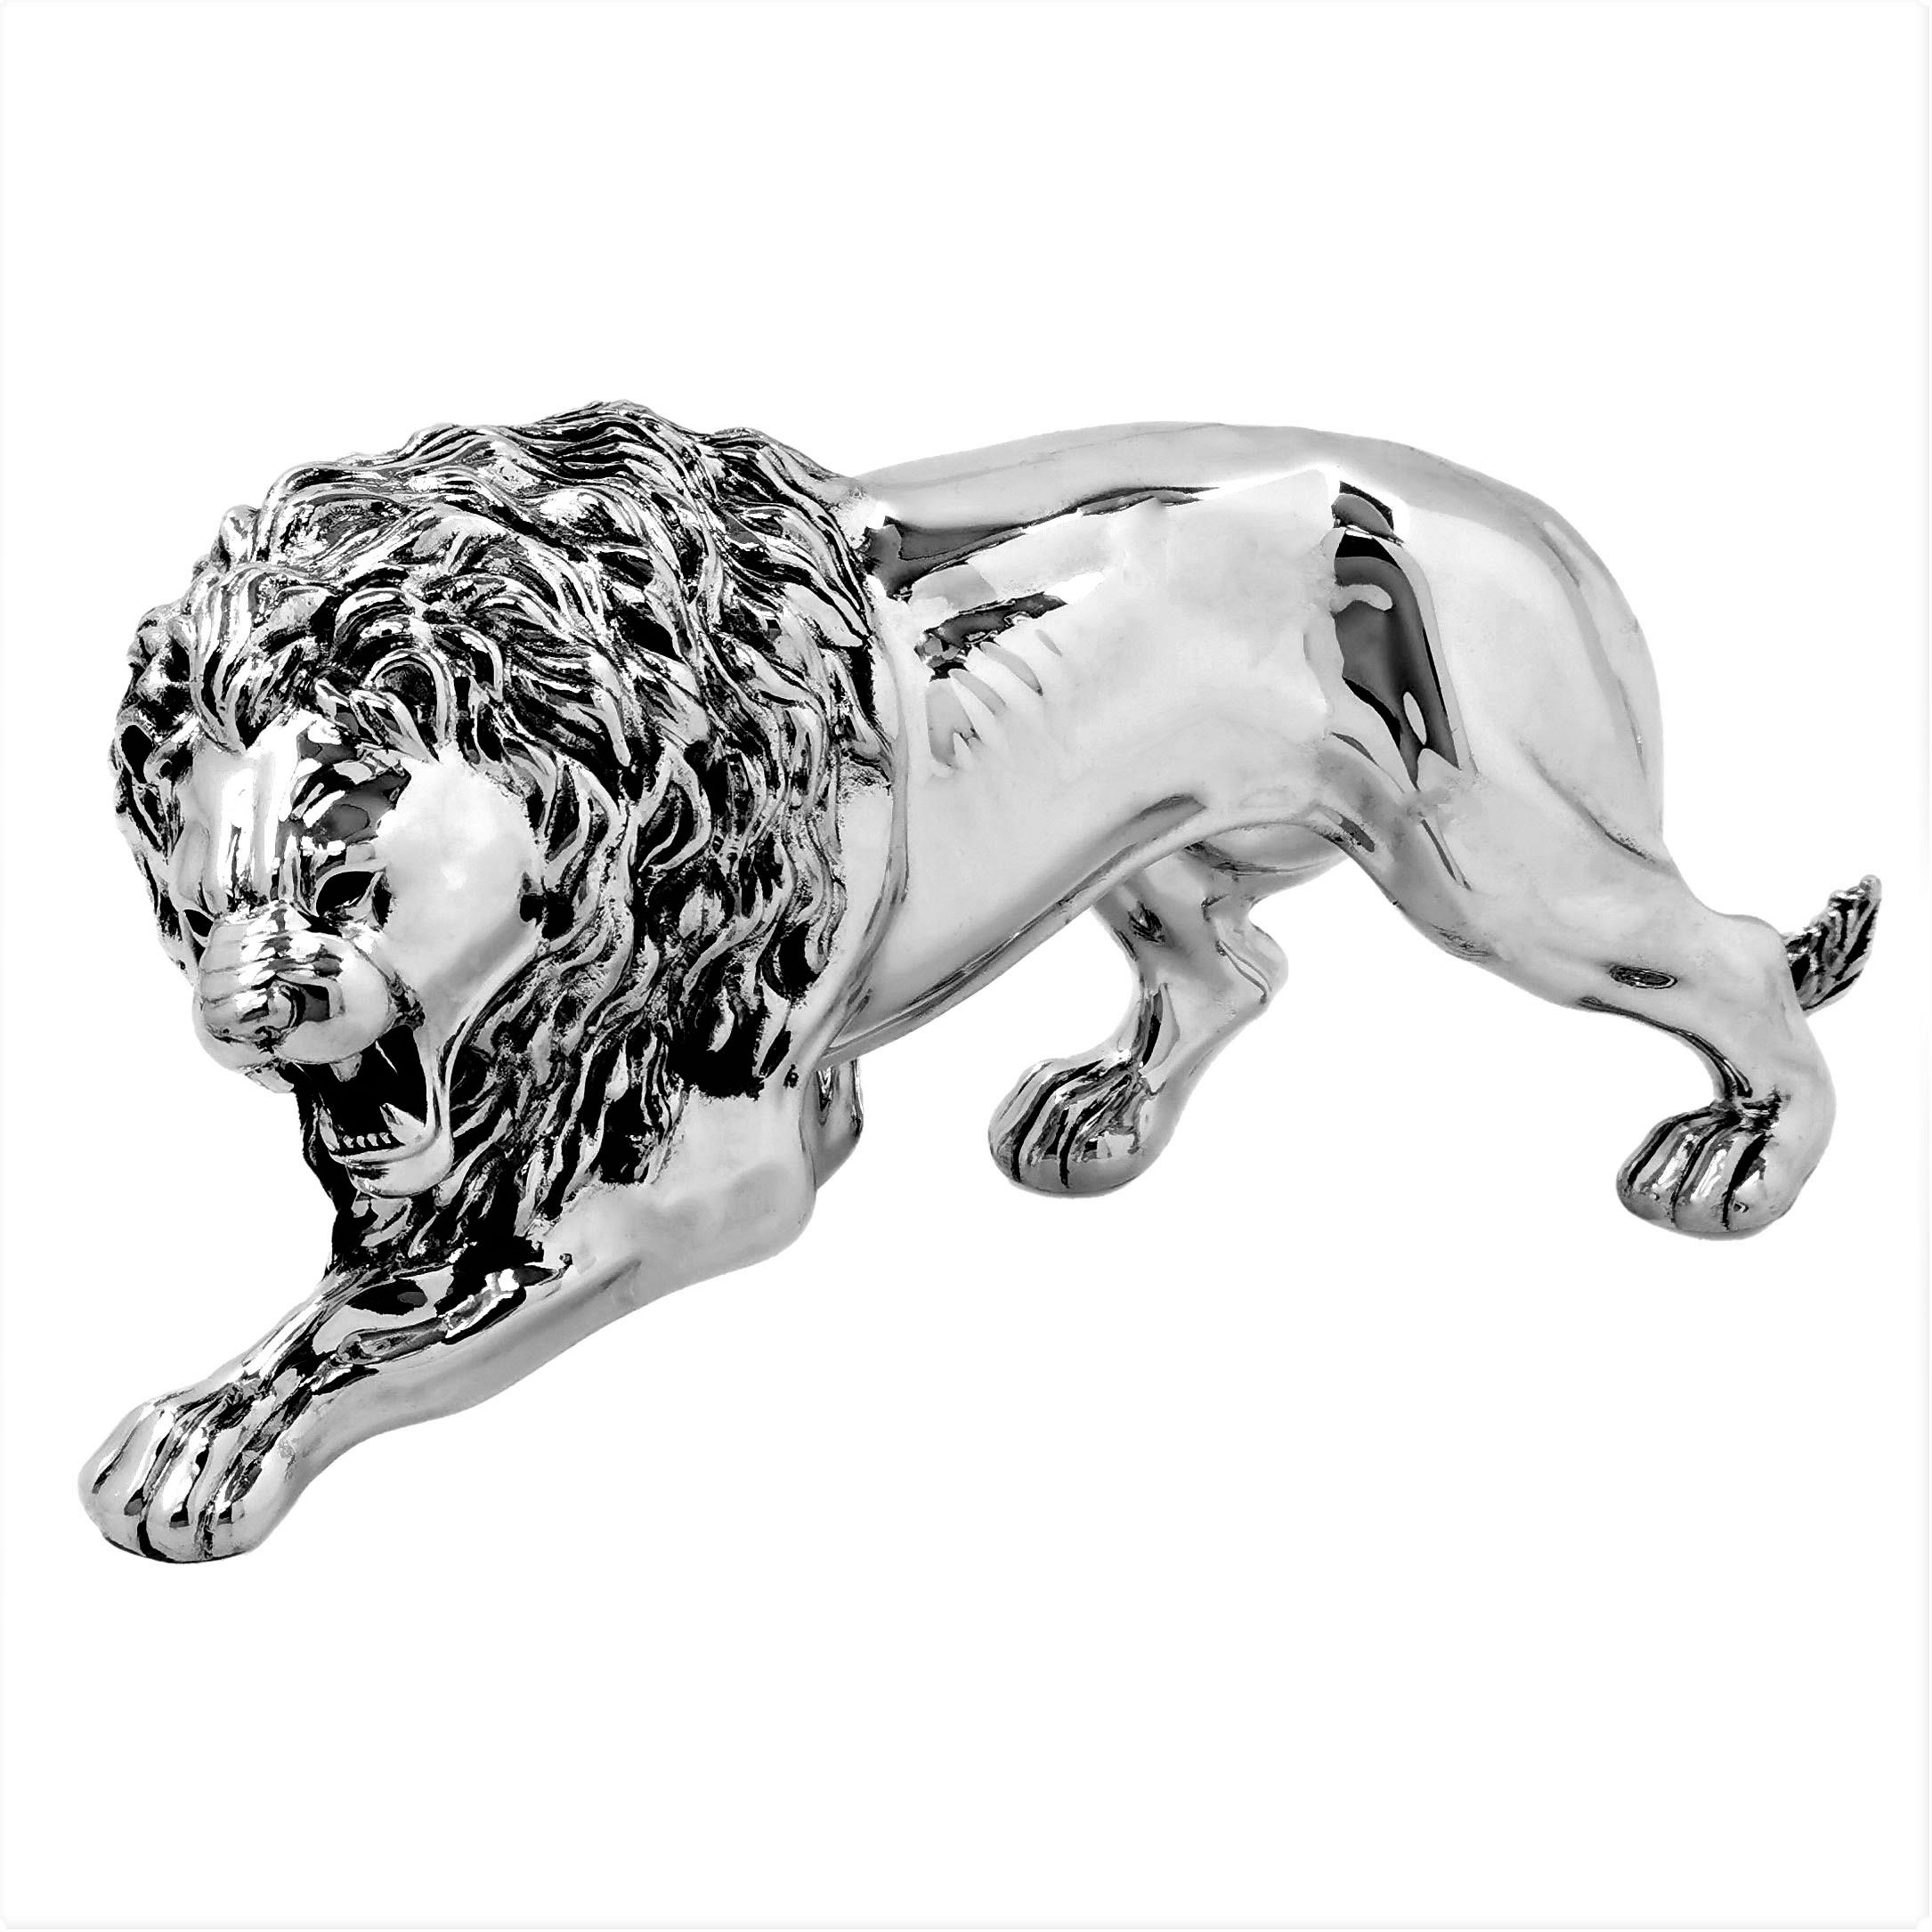 An elegant sterling Silver model of a male Lion with an impressive mane and appearing to prowl. The Body of the Lion has a highly polished finish and the figurine is of a notably impressive weight.

Made in Italy in c. 1960.

Approx. Weight - 1316g